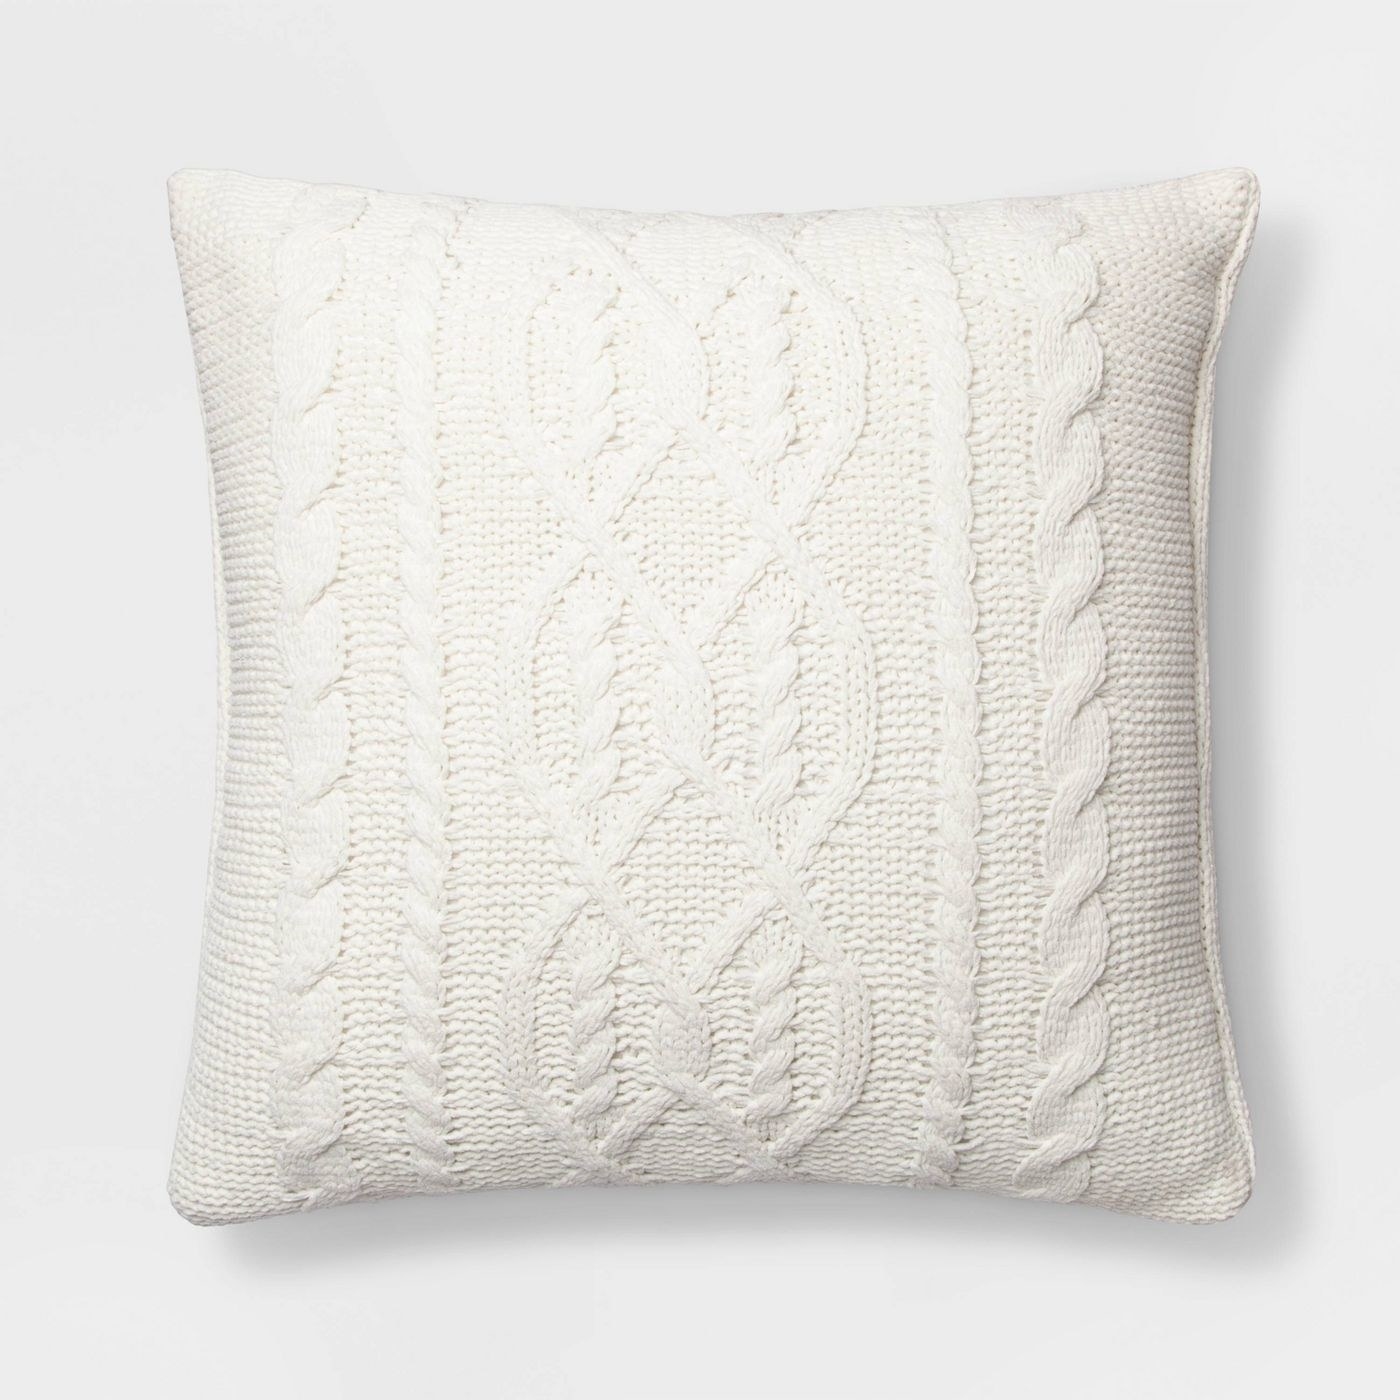 A white throw pillow with a cable knit pattern on it